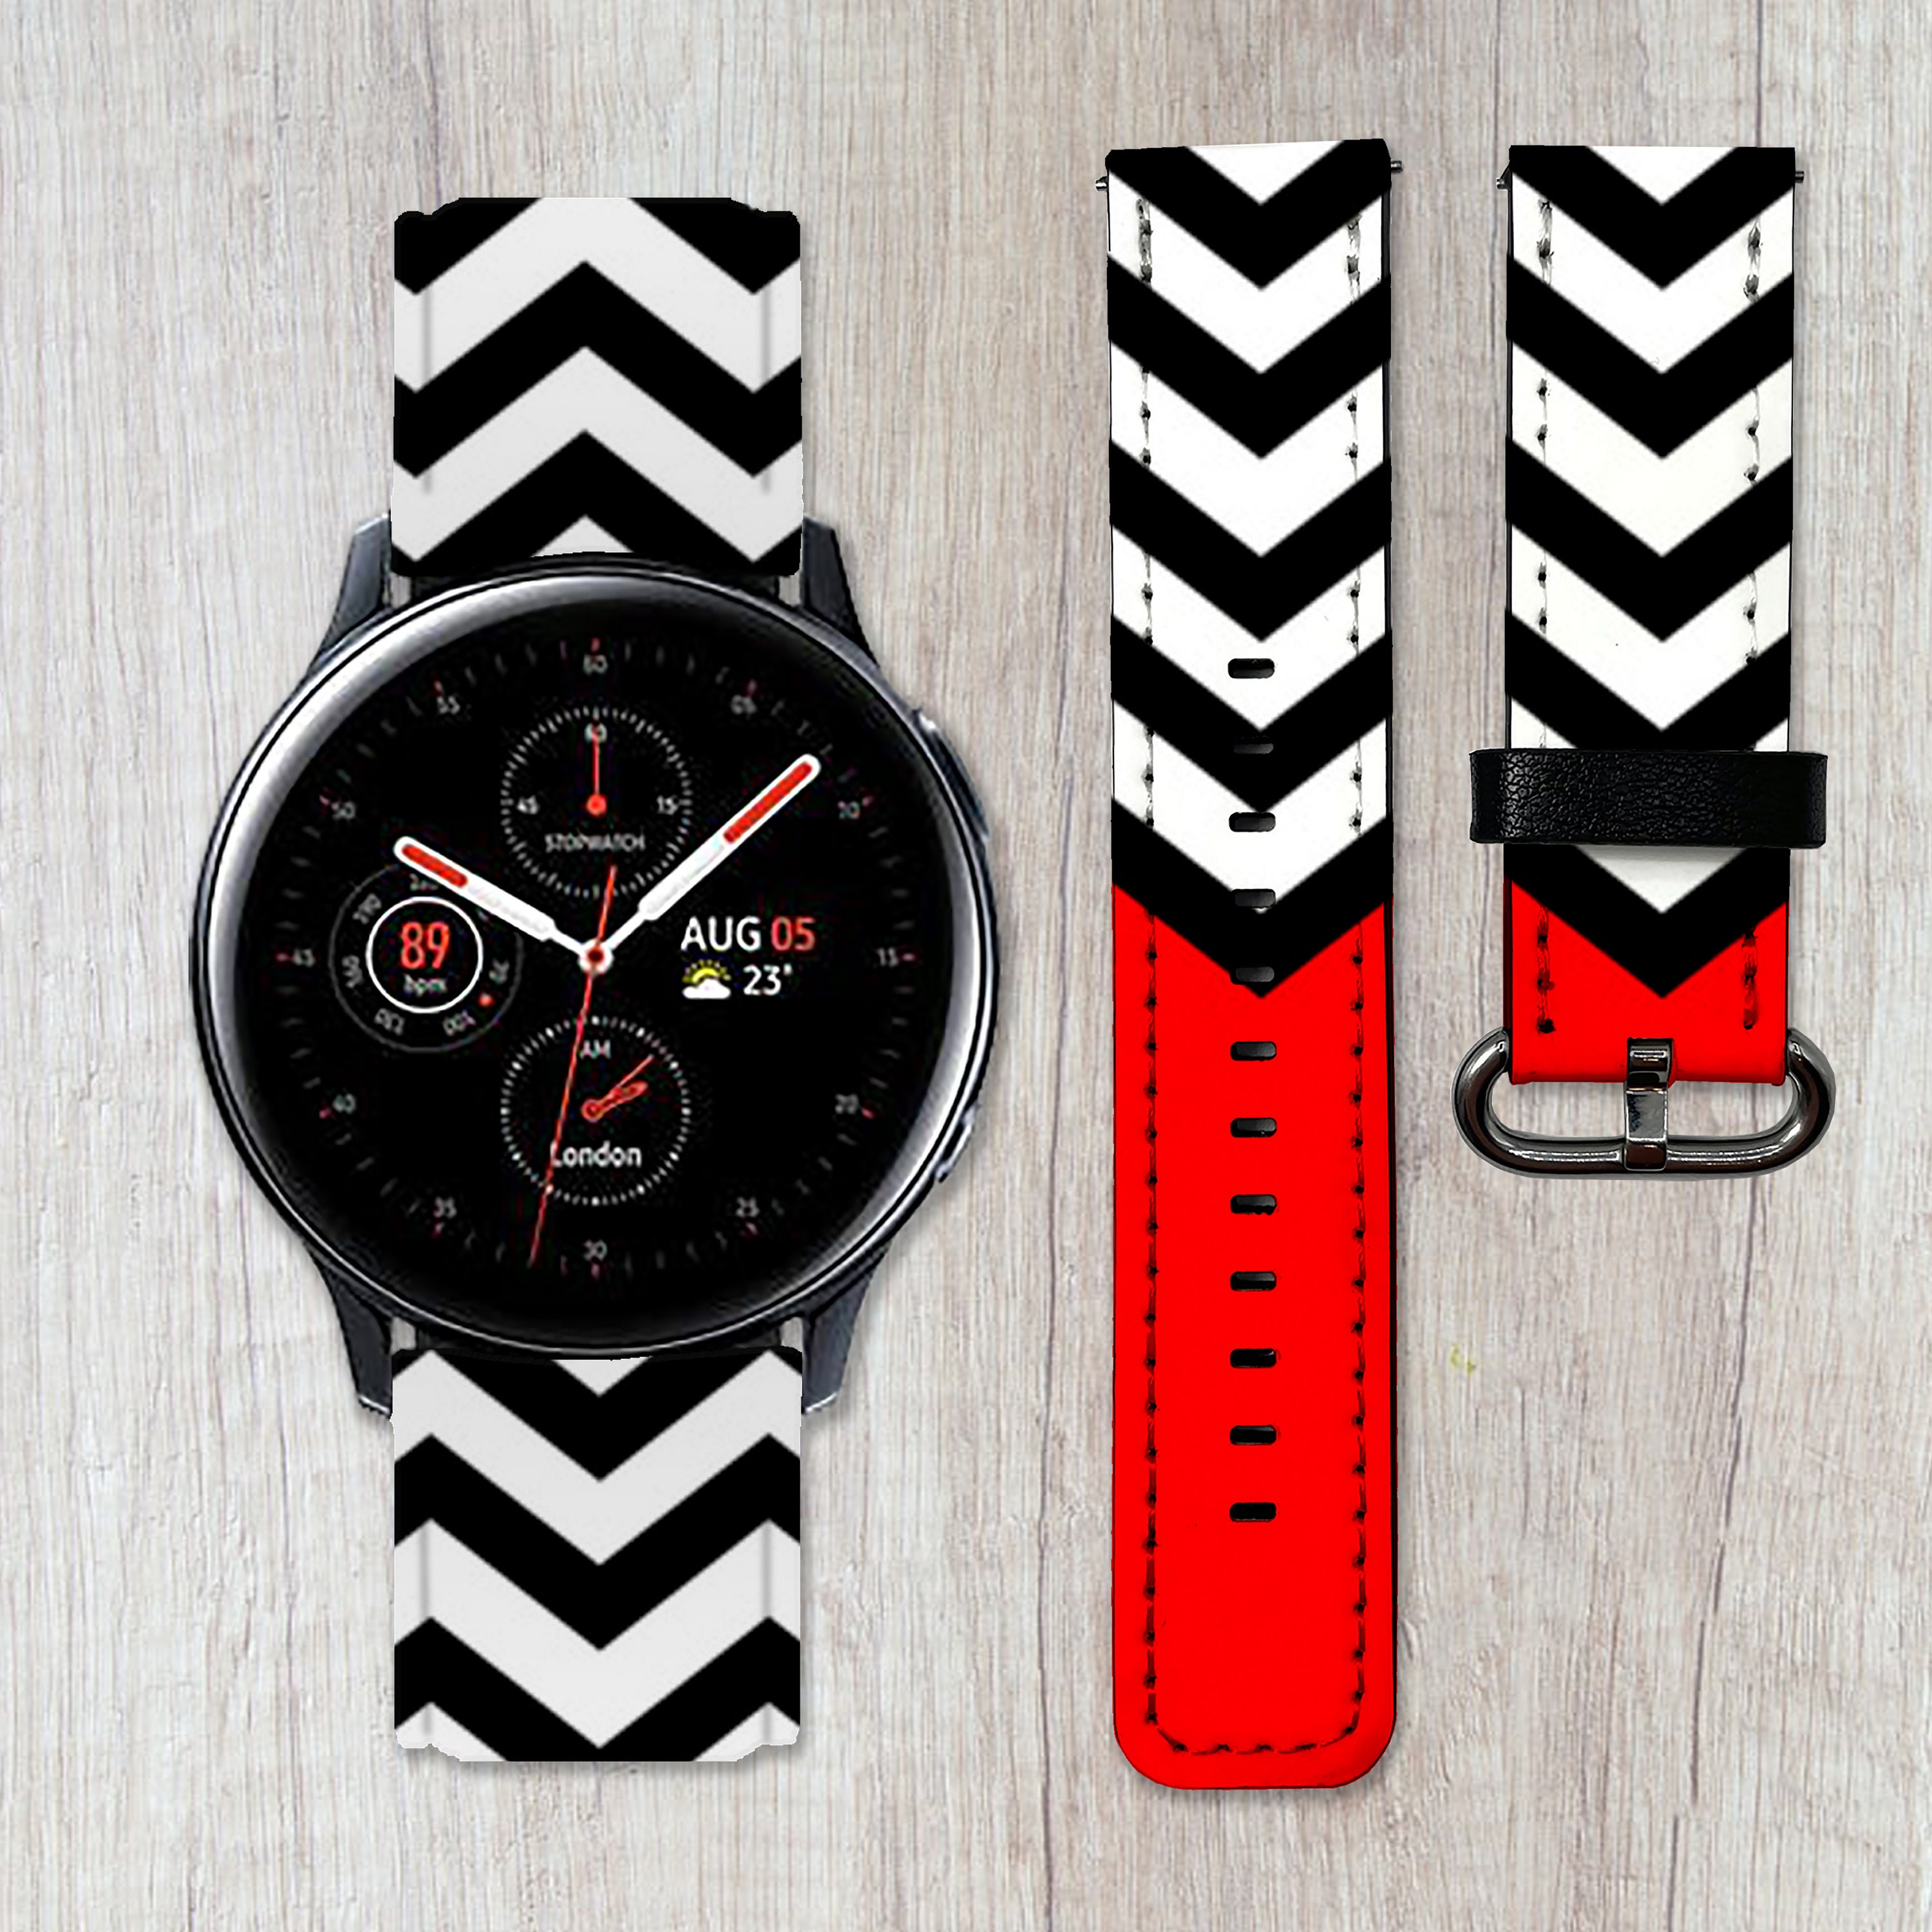 The American Flag Stars and Stripes Silicone Band for Samsung Gear S3  Frontier Strap for Gear S3 Classic Smart Watch Bracelet - AliExpress